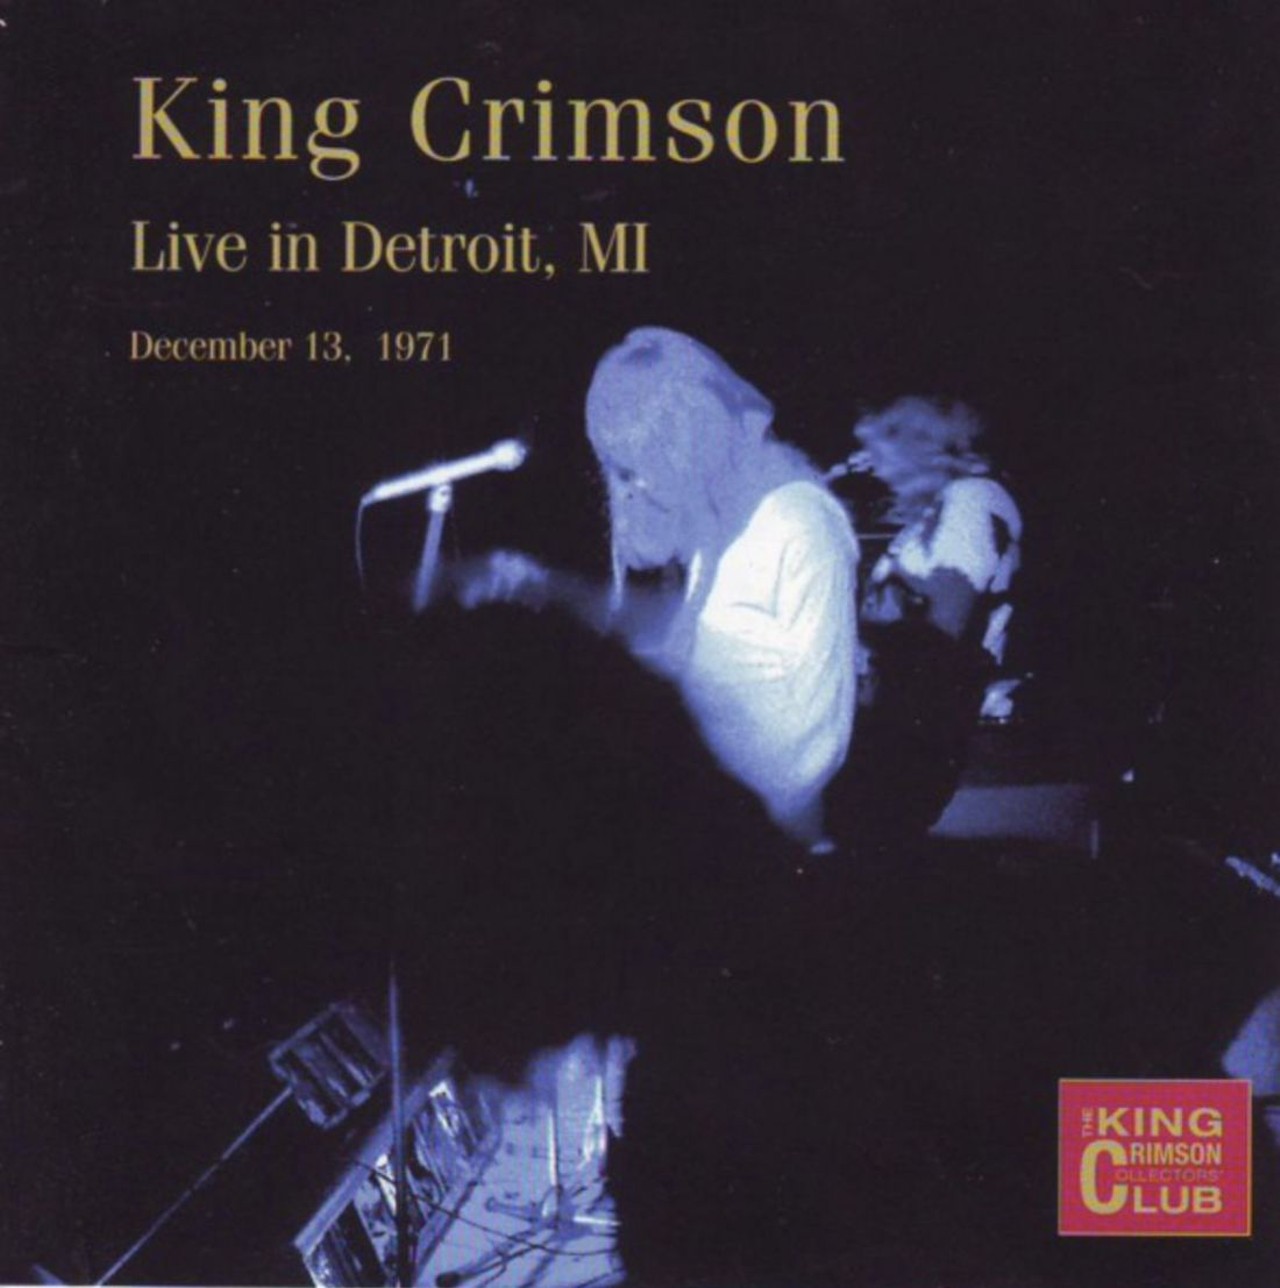 King Crimson - Live In Detroit, MI  A double LP recorded on November 13, 1971 at the Eastown Theater.